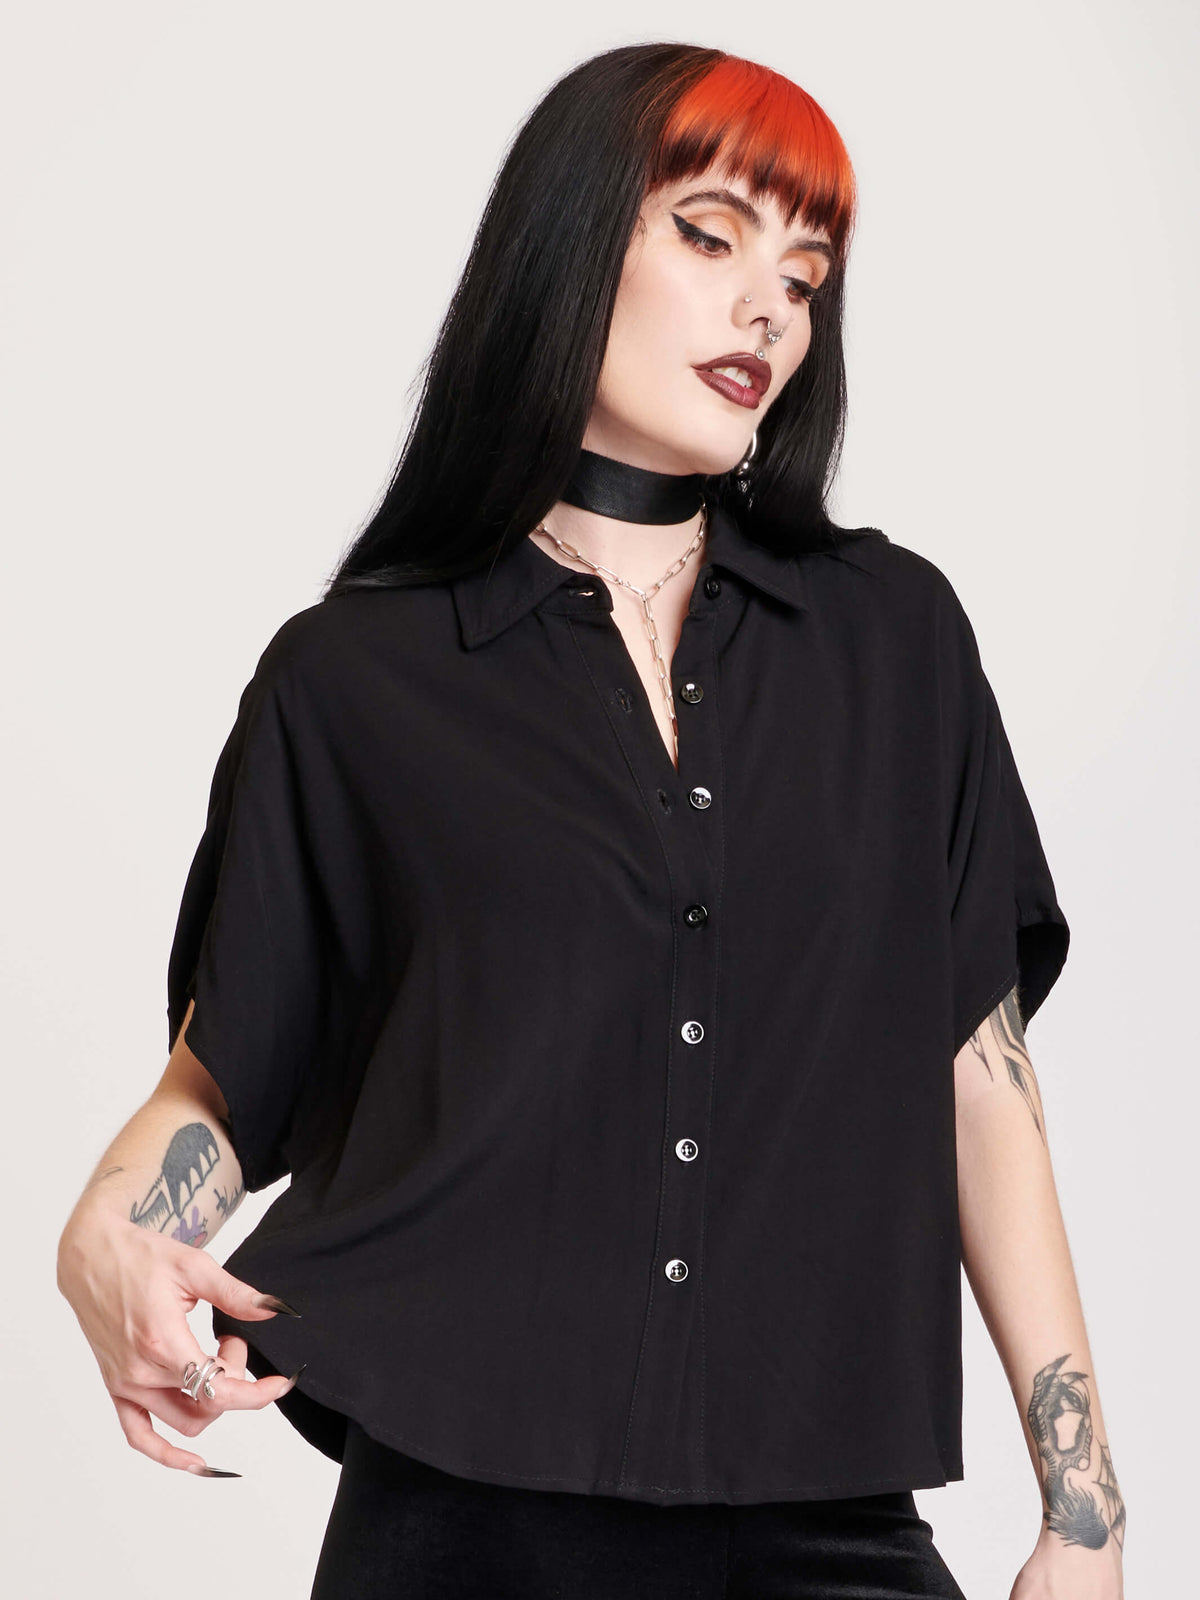 black button up shirt with embroidered back mesh panel,